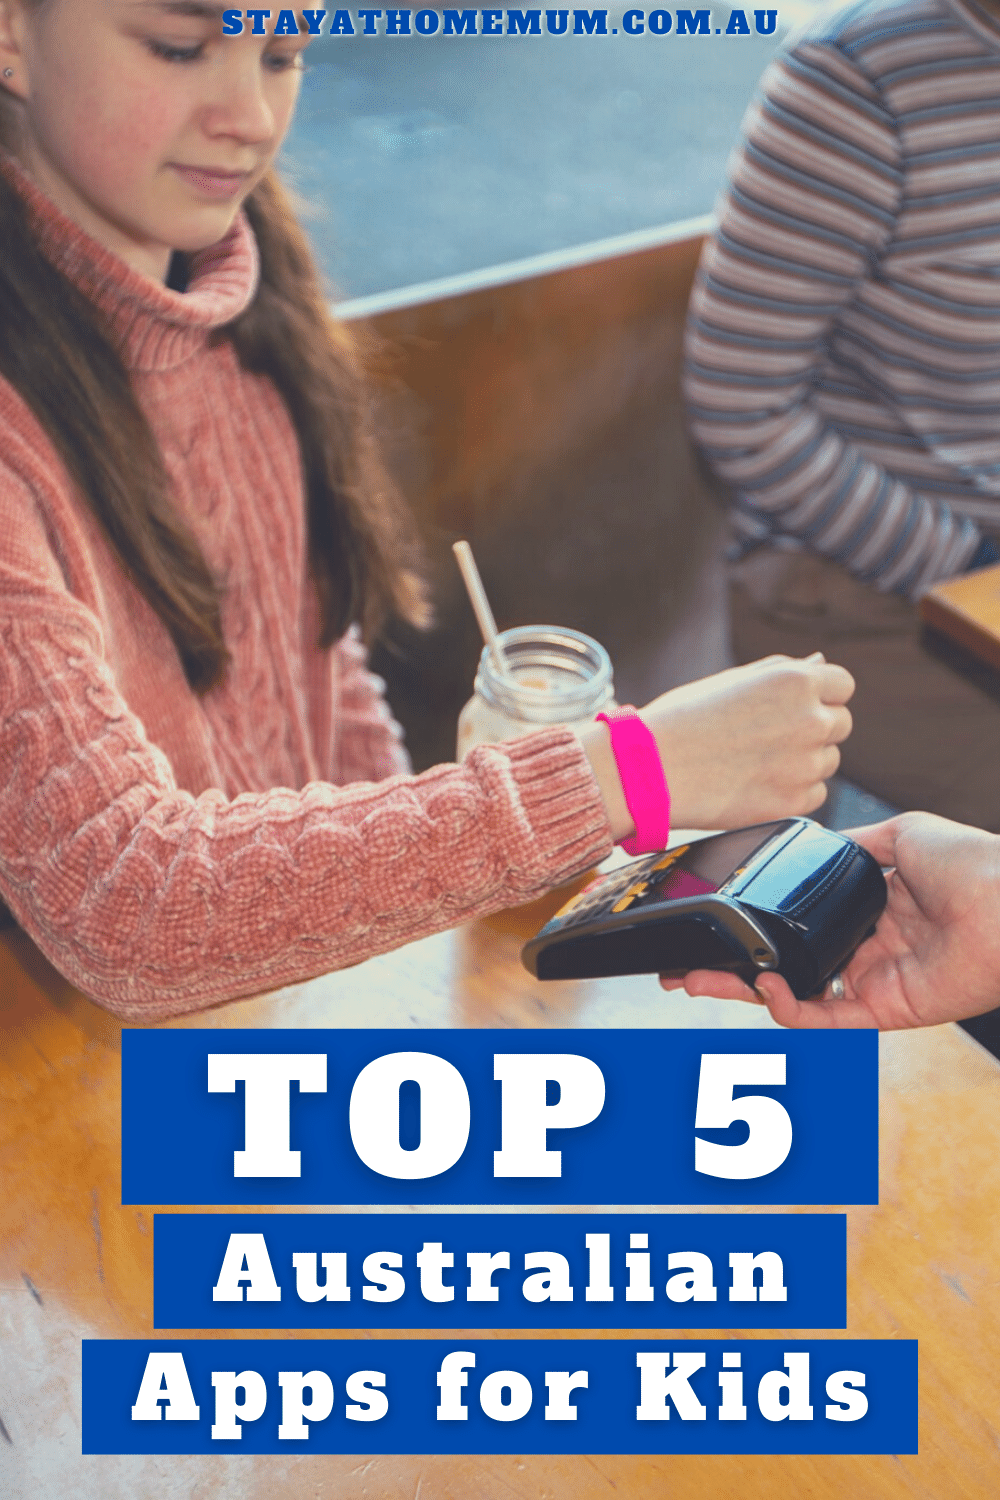 Top 5 Australian Apps for Kids 1 | Stay at Home Mum.com.au